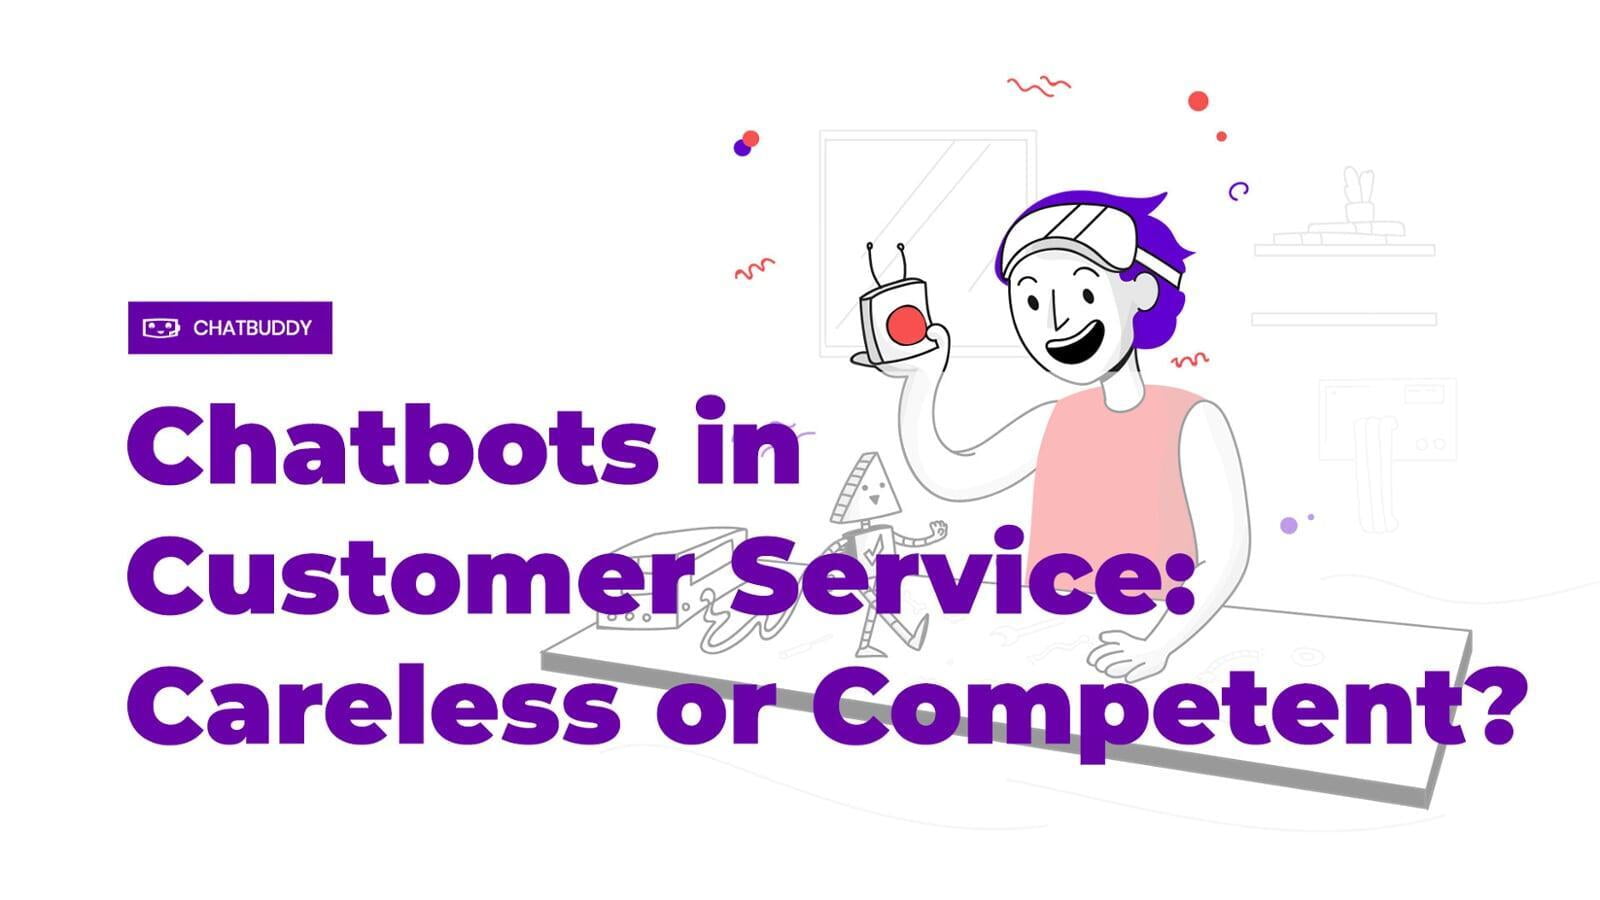 Chatbots in Customer Service: Careless or Competent?